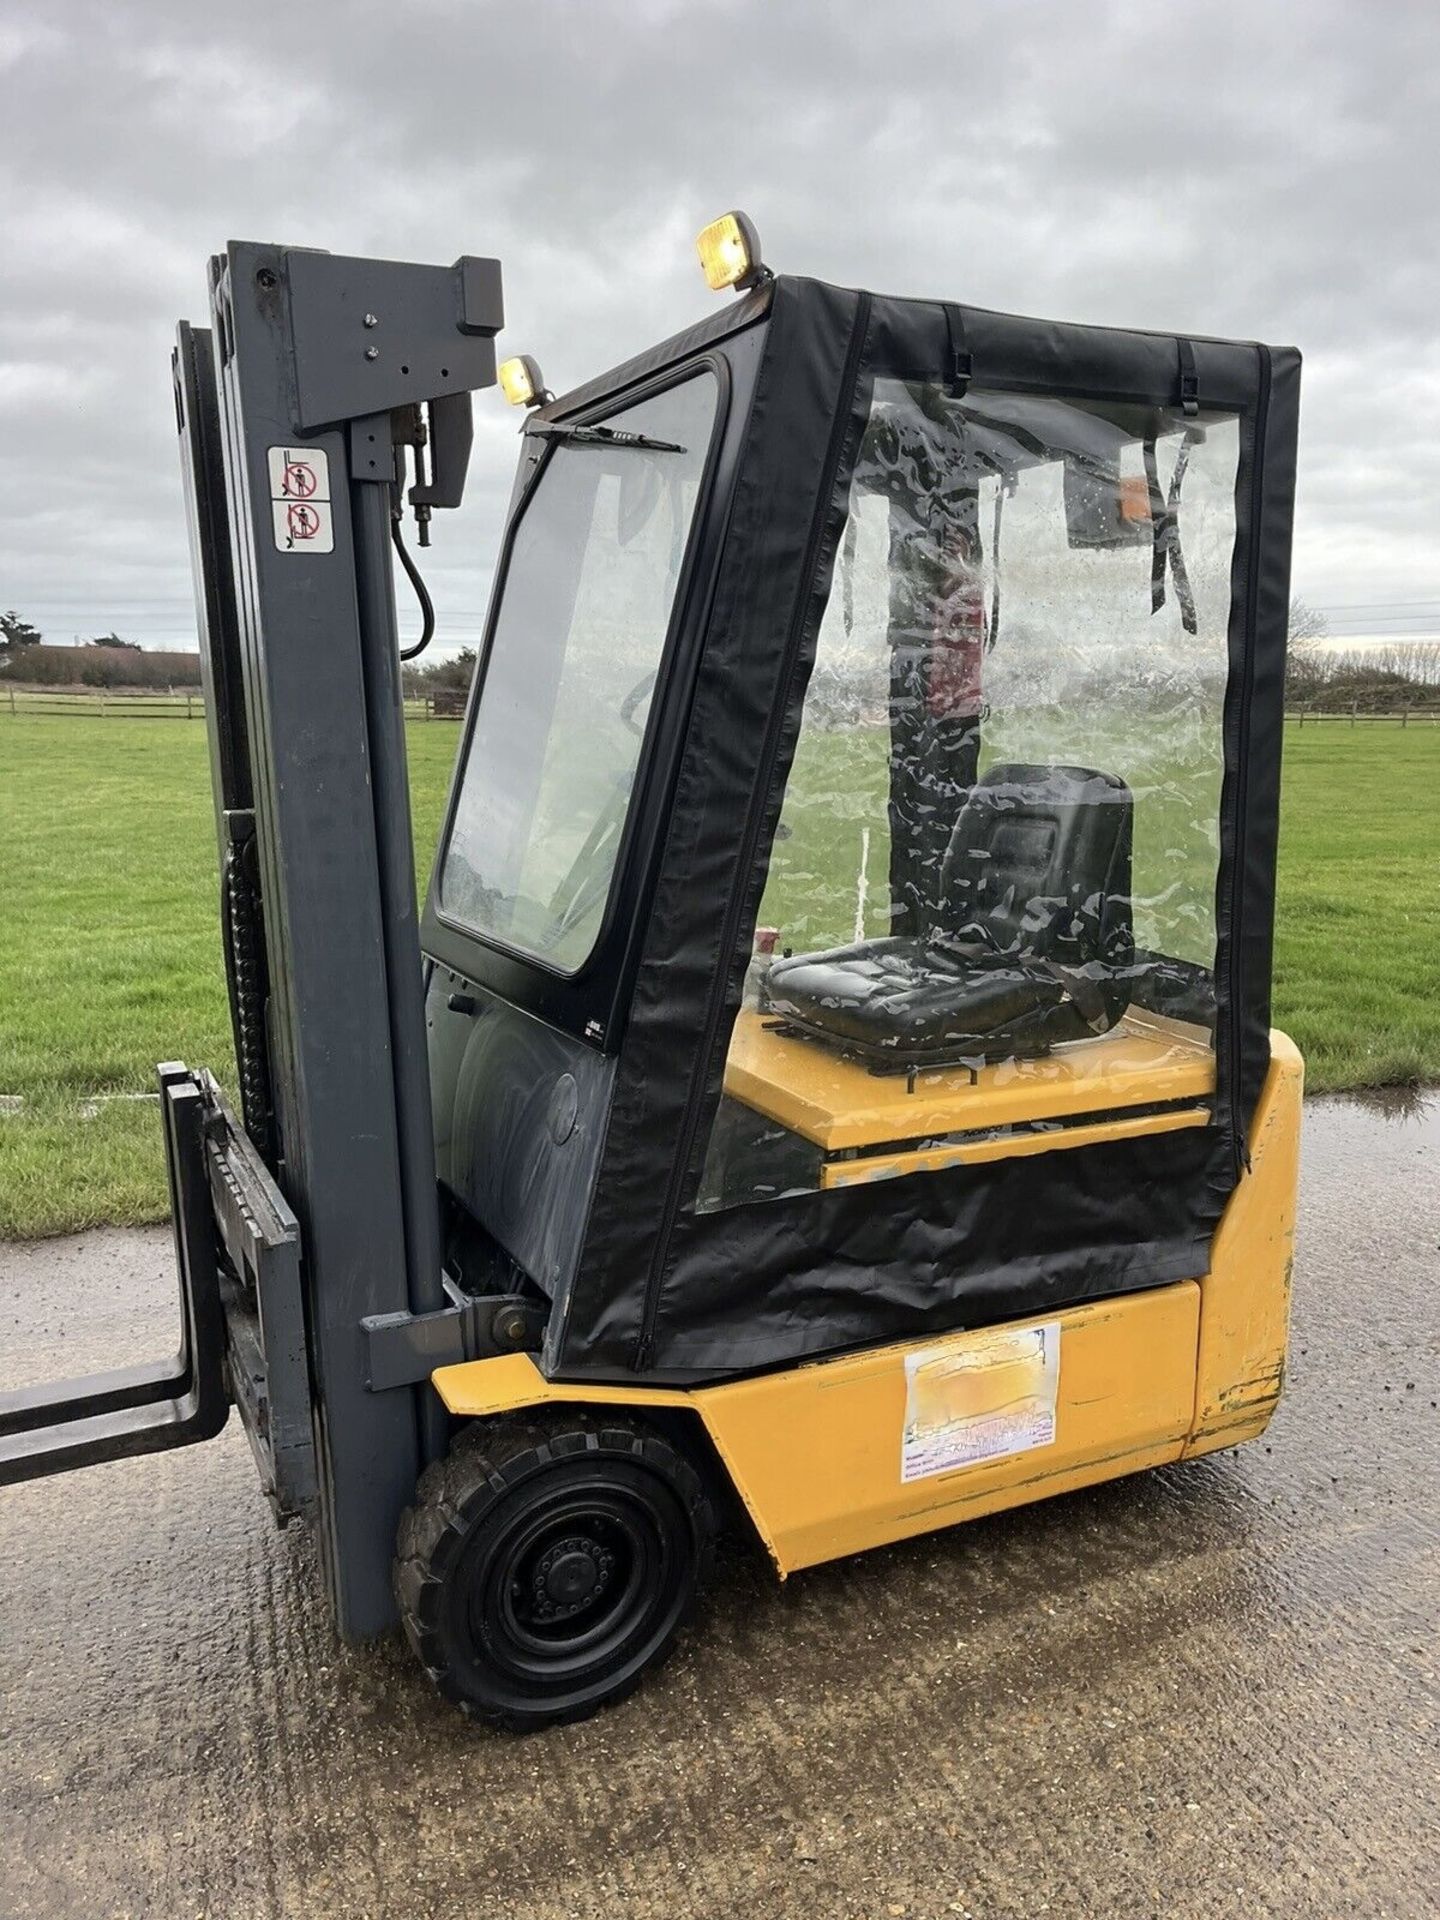 BOSS 1.6 Electric Forklift Truck (Container Spec) - Image 8 of 8